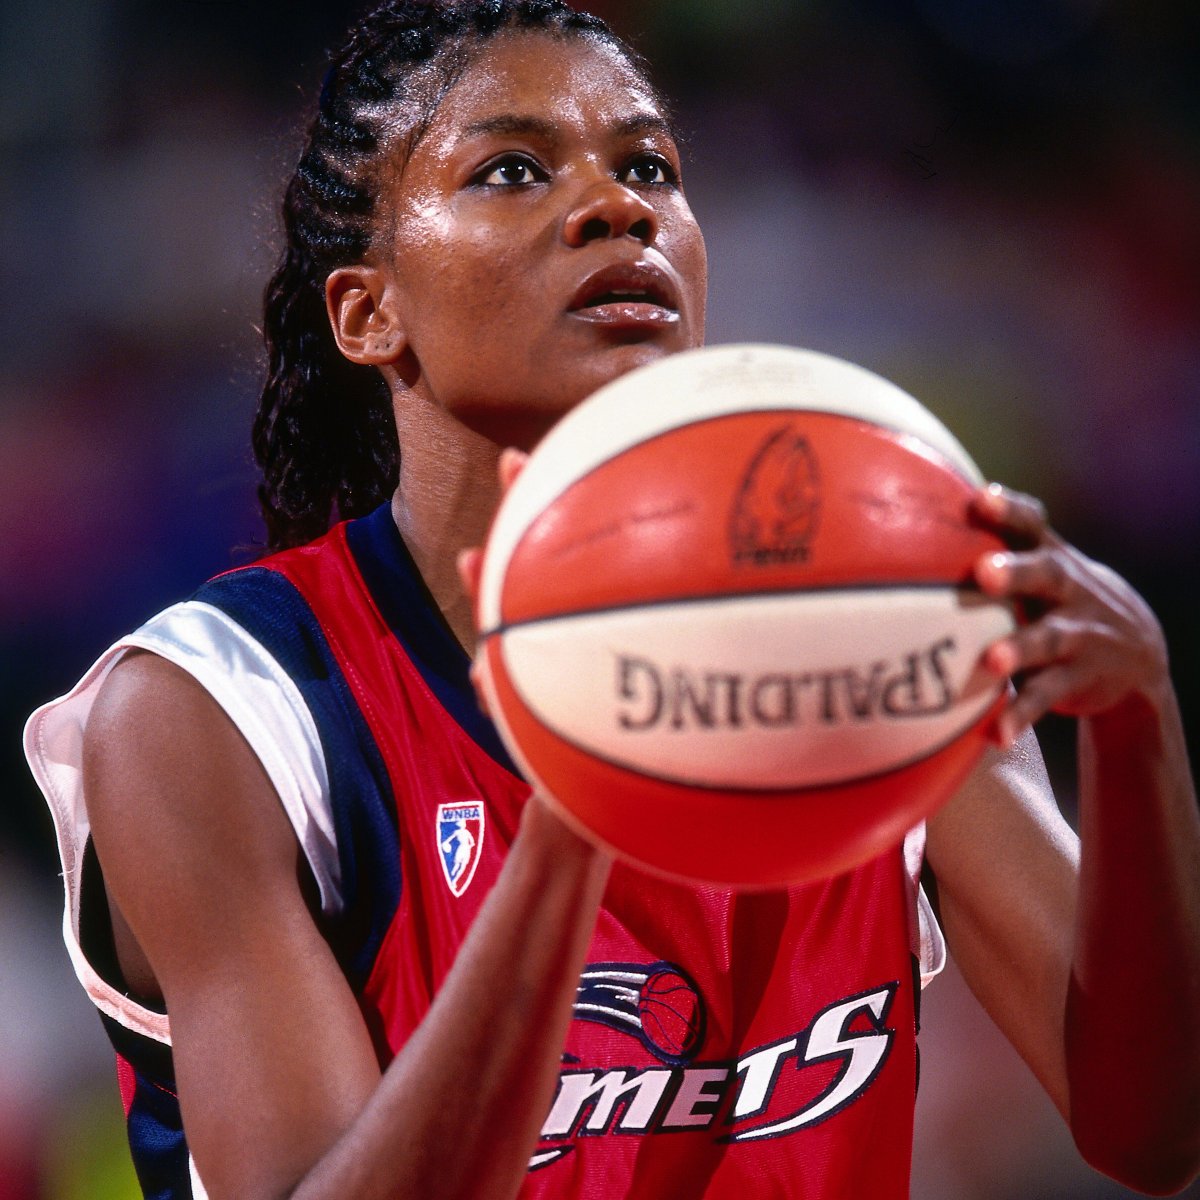 WNBA Legend Sheryl Swoopes Continues To Serve As A Role Model With Her  Non-Profit, Basketball Camp